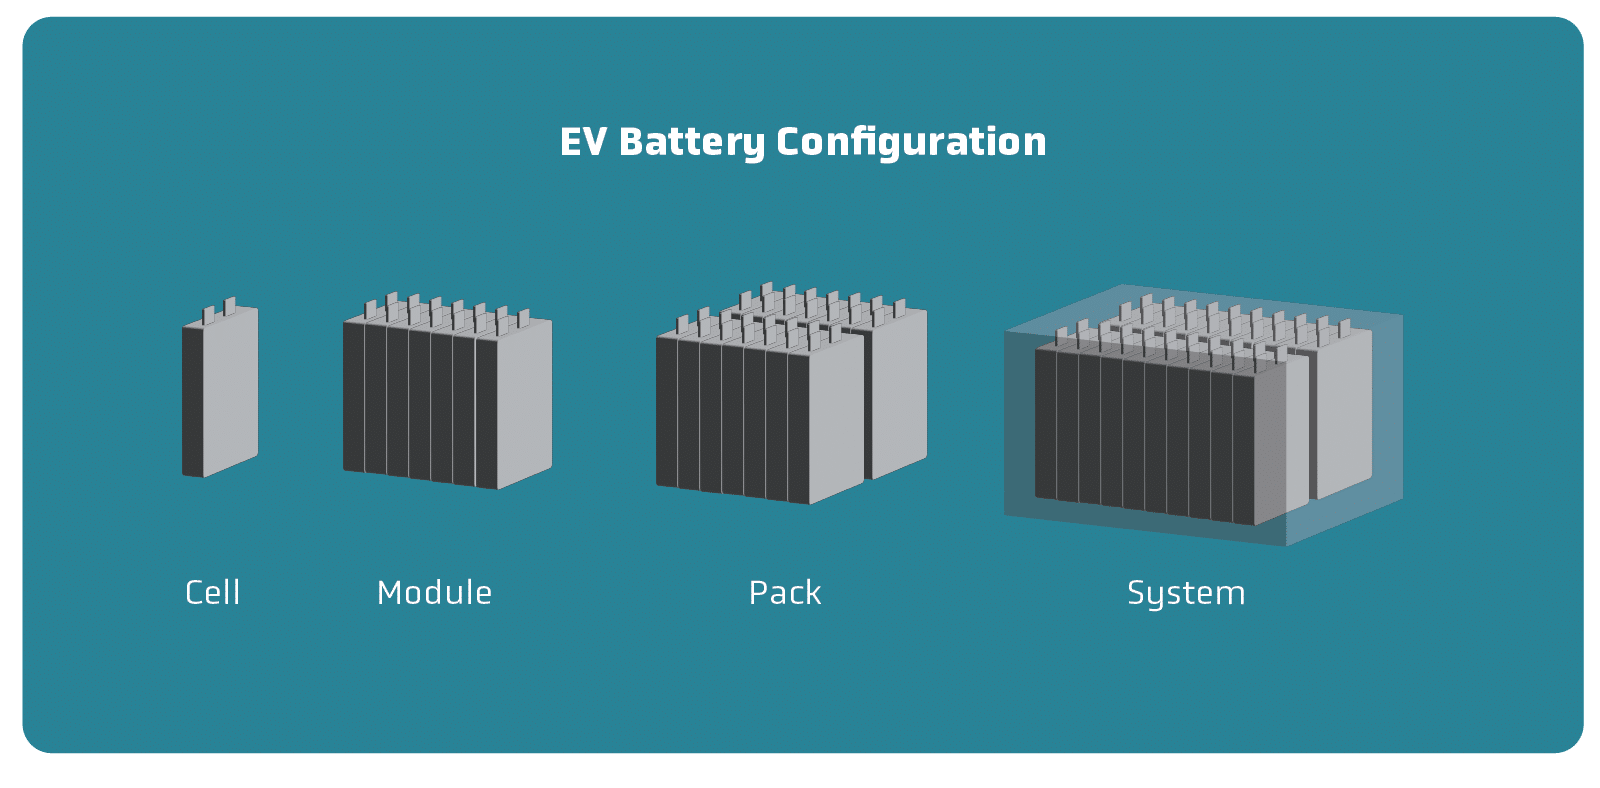 Infographic showing the difference between a single battery cell, a module of cells, a pack of modules, and a complete battery system.